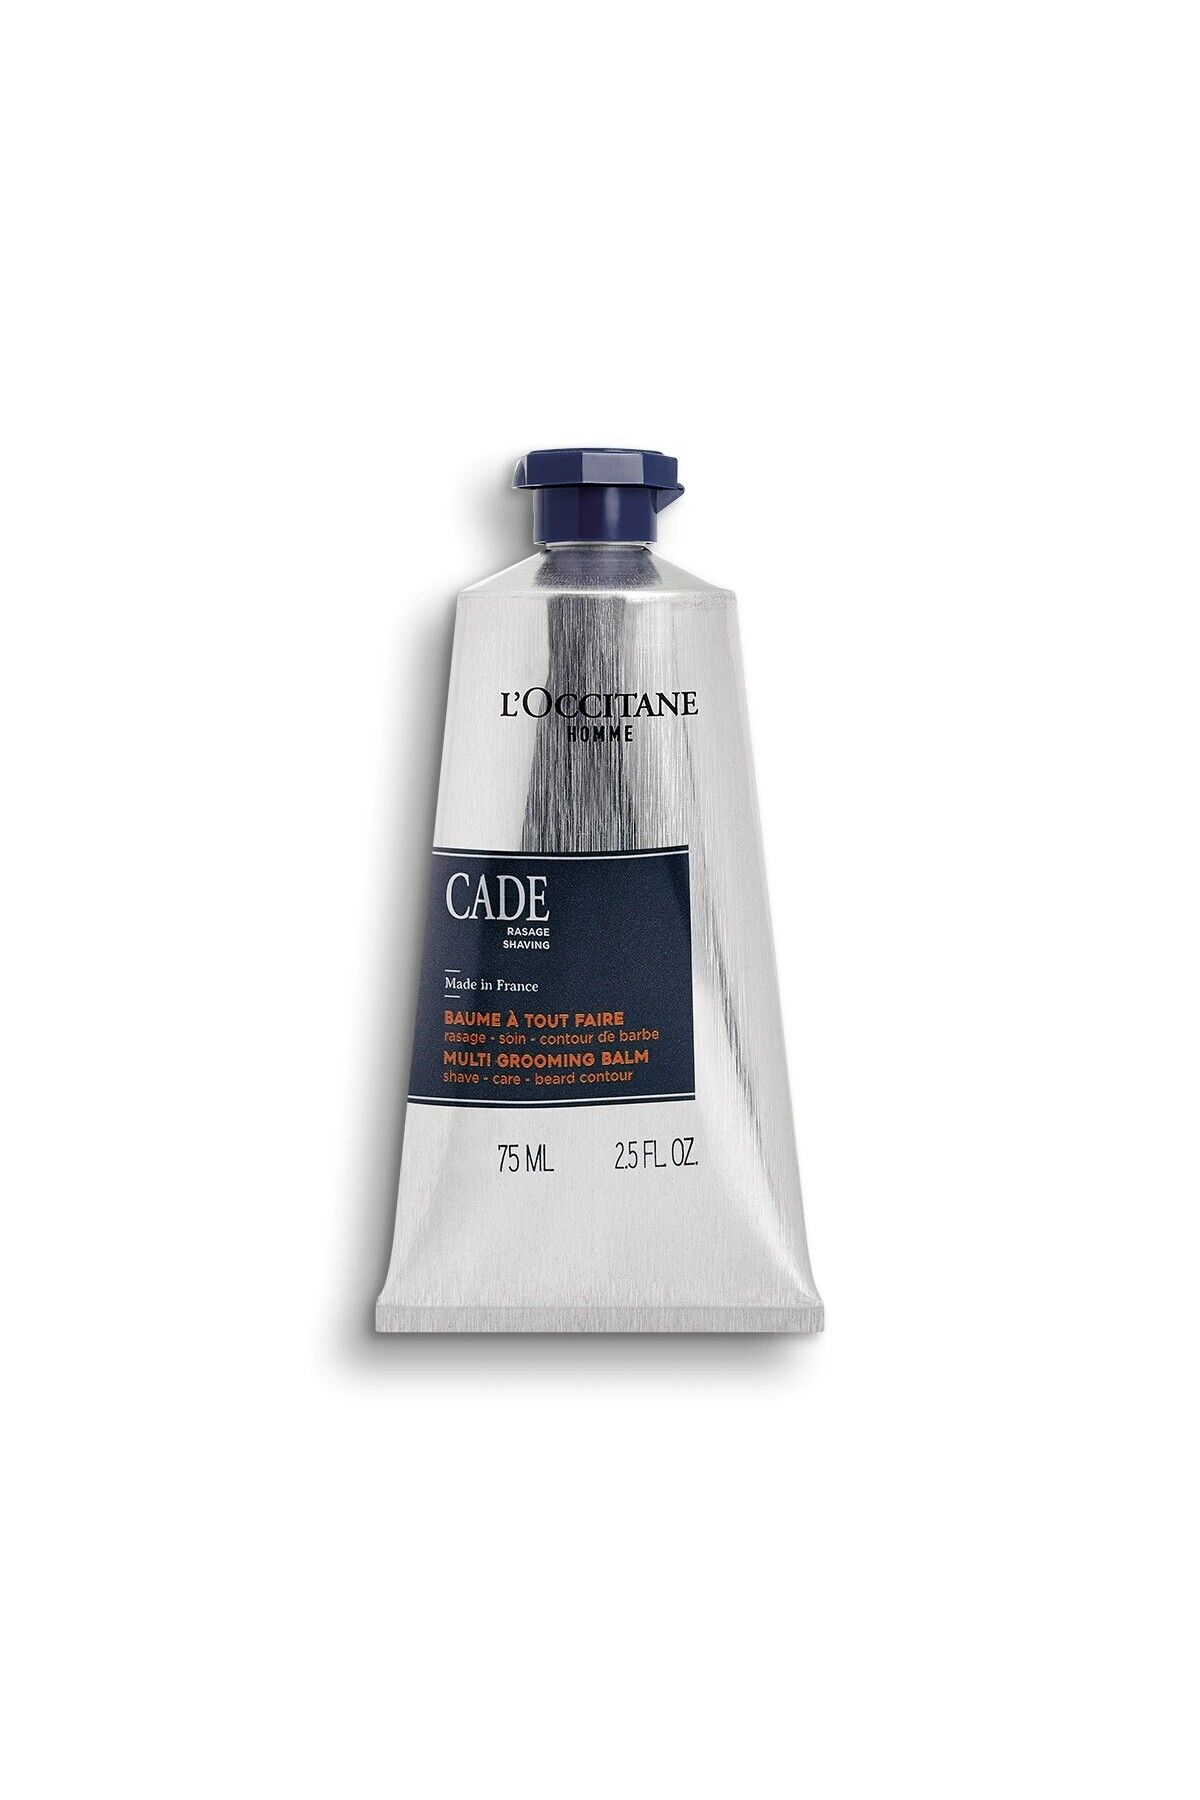 L'Occitane CADE MULTİ GROOMİNG BALM - CADE SHAVİNG AND AFTER SHAVE BALM - 75 ML DEMBA3011